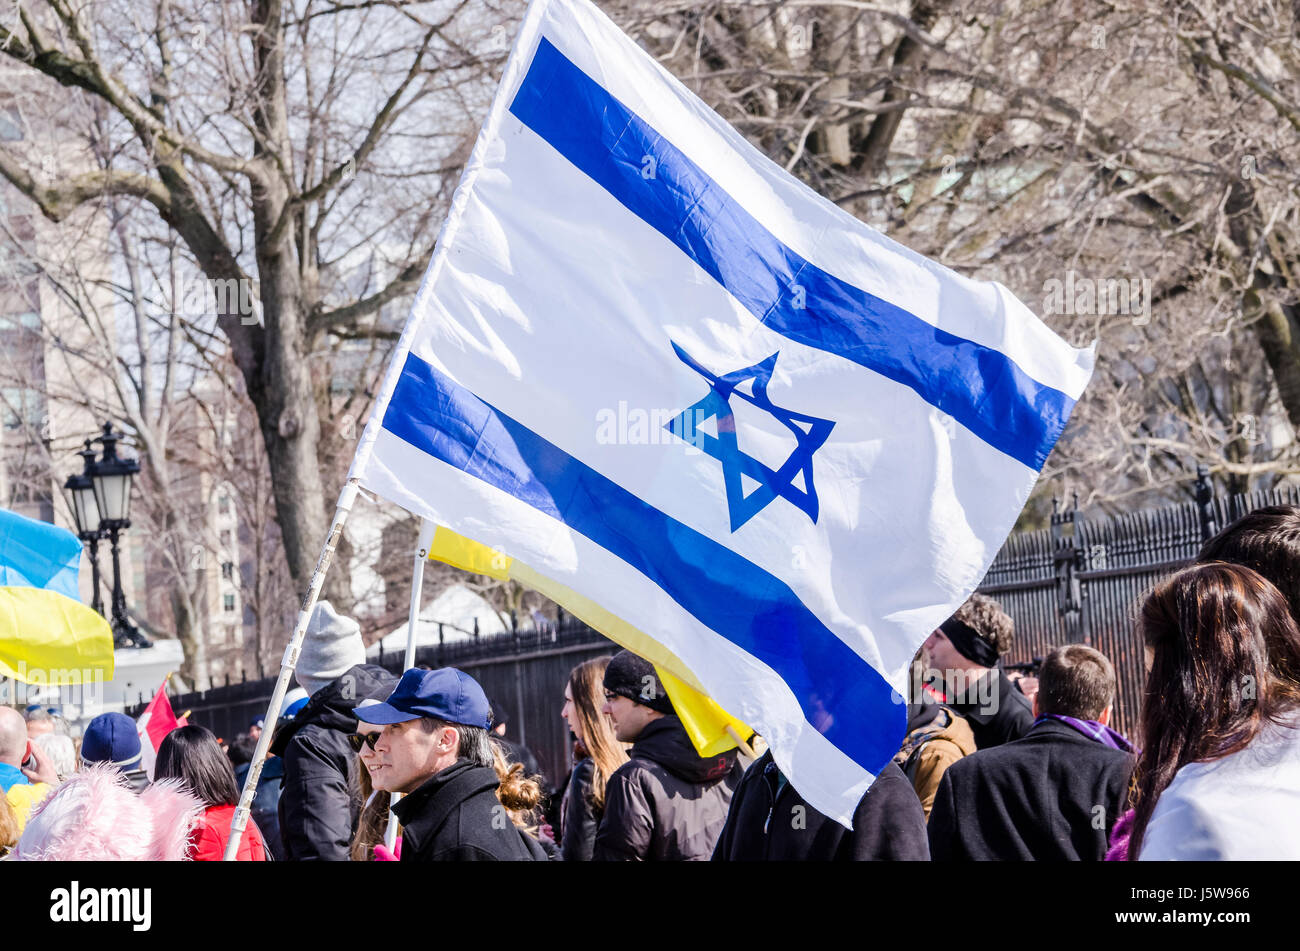 Washington DC, USA - March 6, 2014: People holding flag of Israel during Ukrainian protest by White House Stock Photo